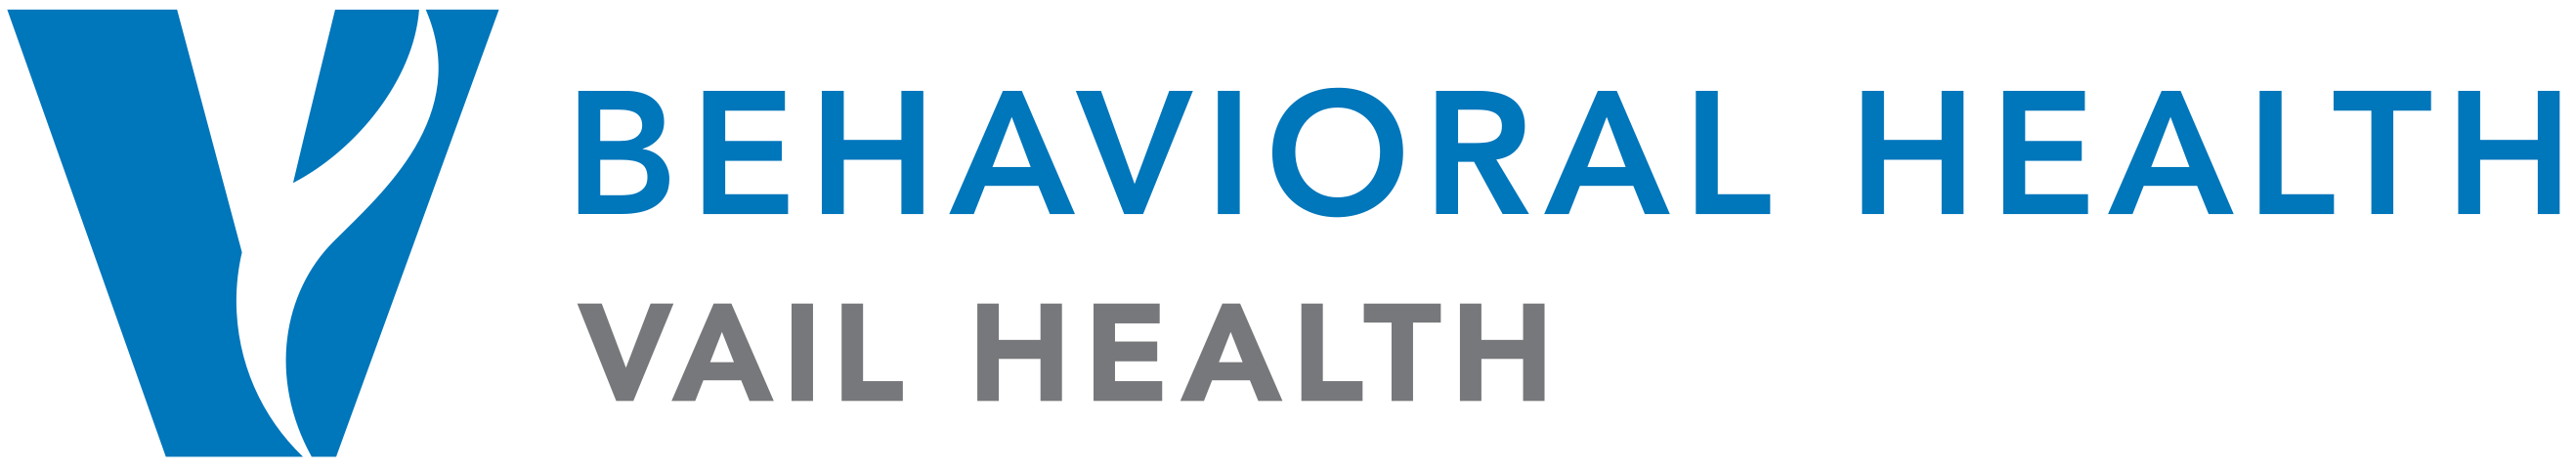 Vail Health Behavioral Health | Therapists & Mental Health Resources